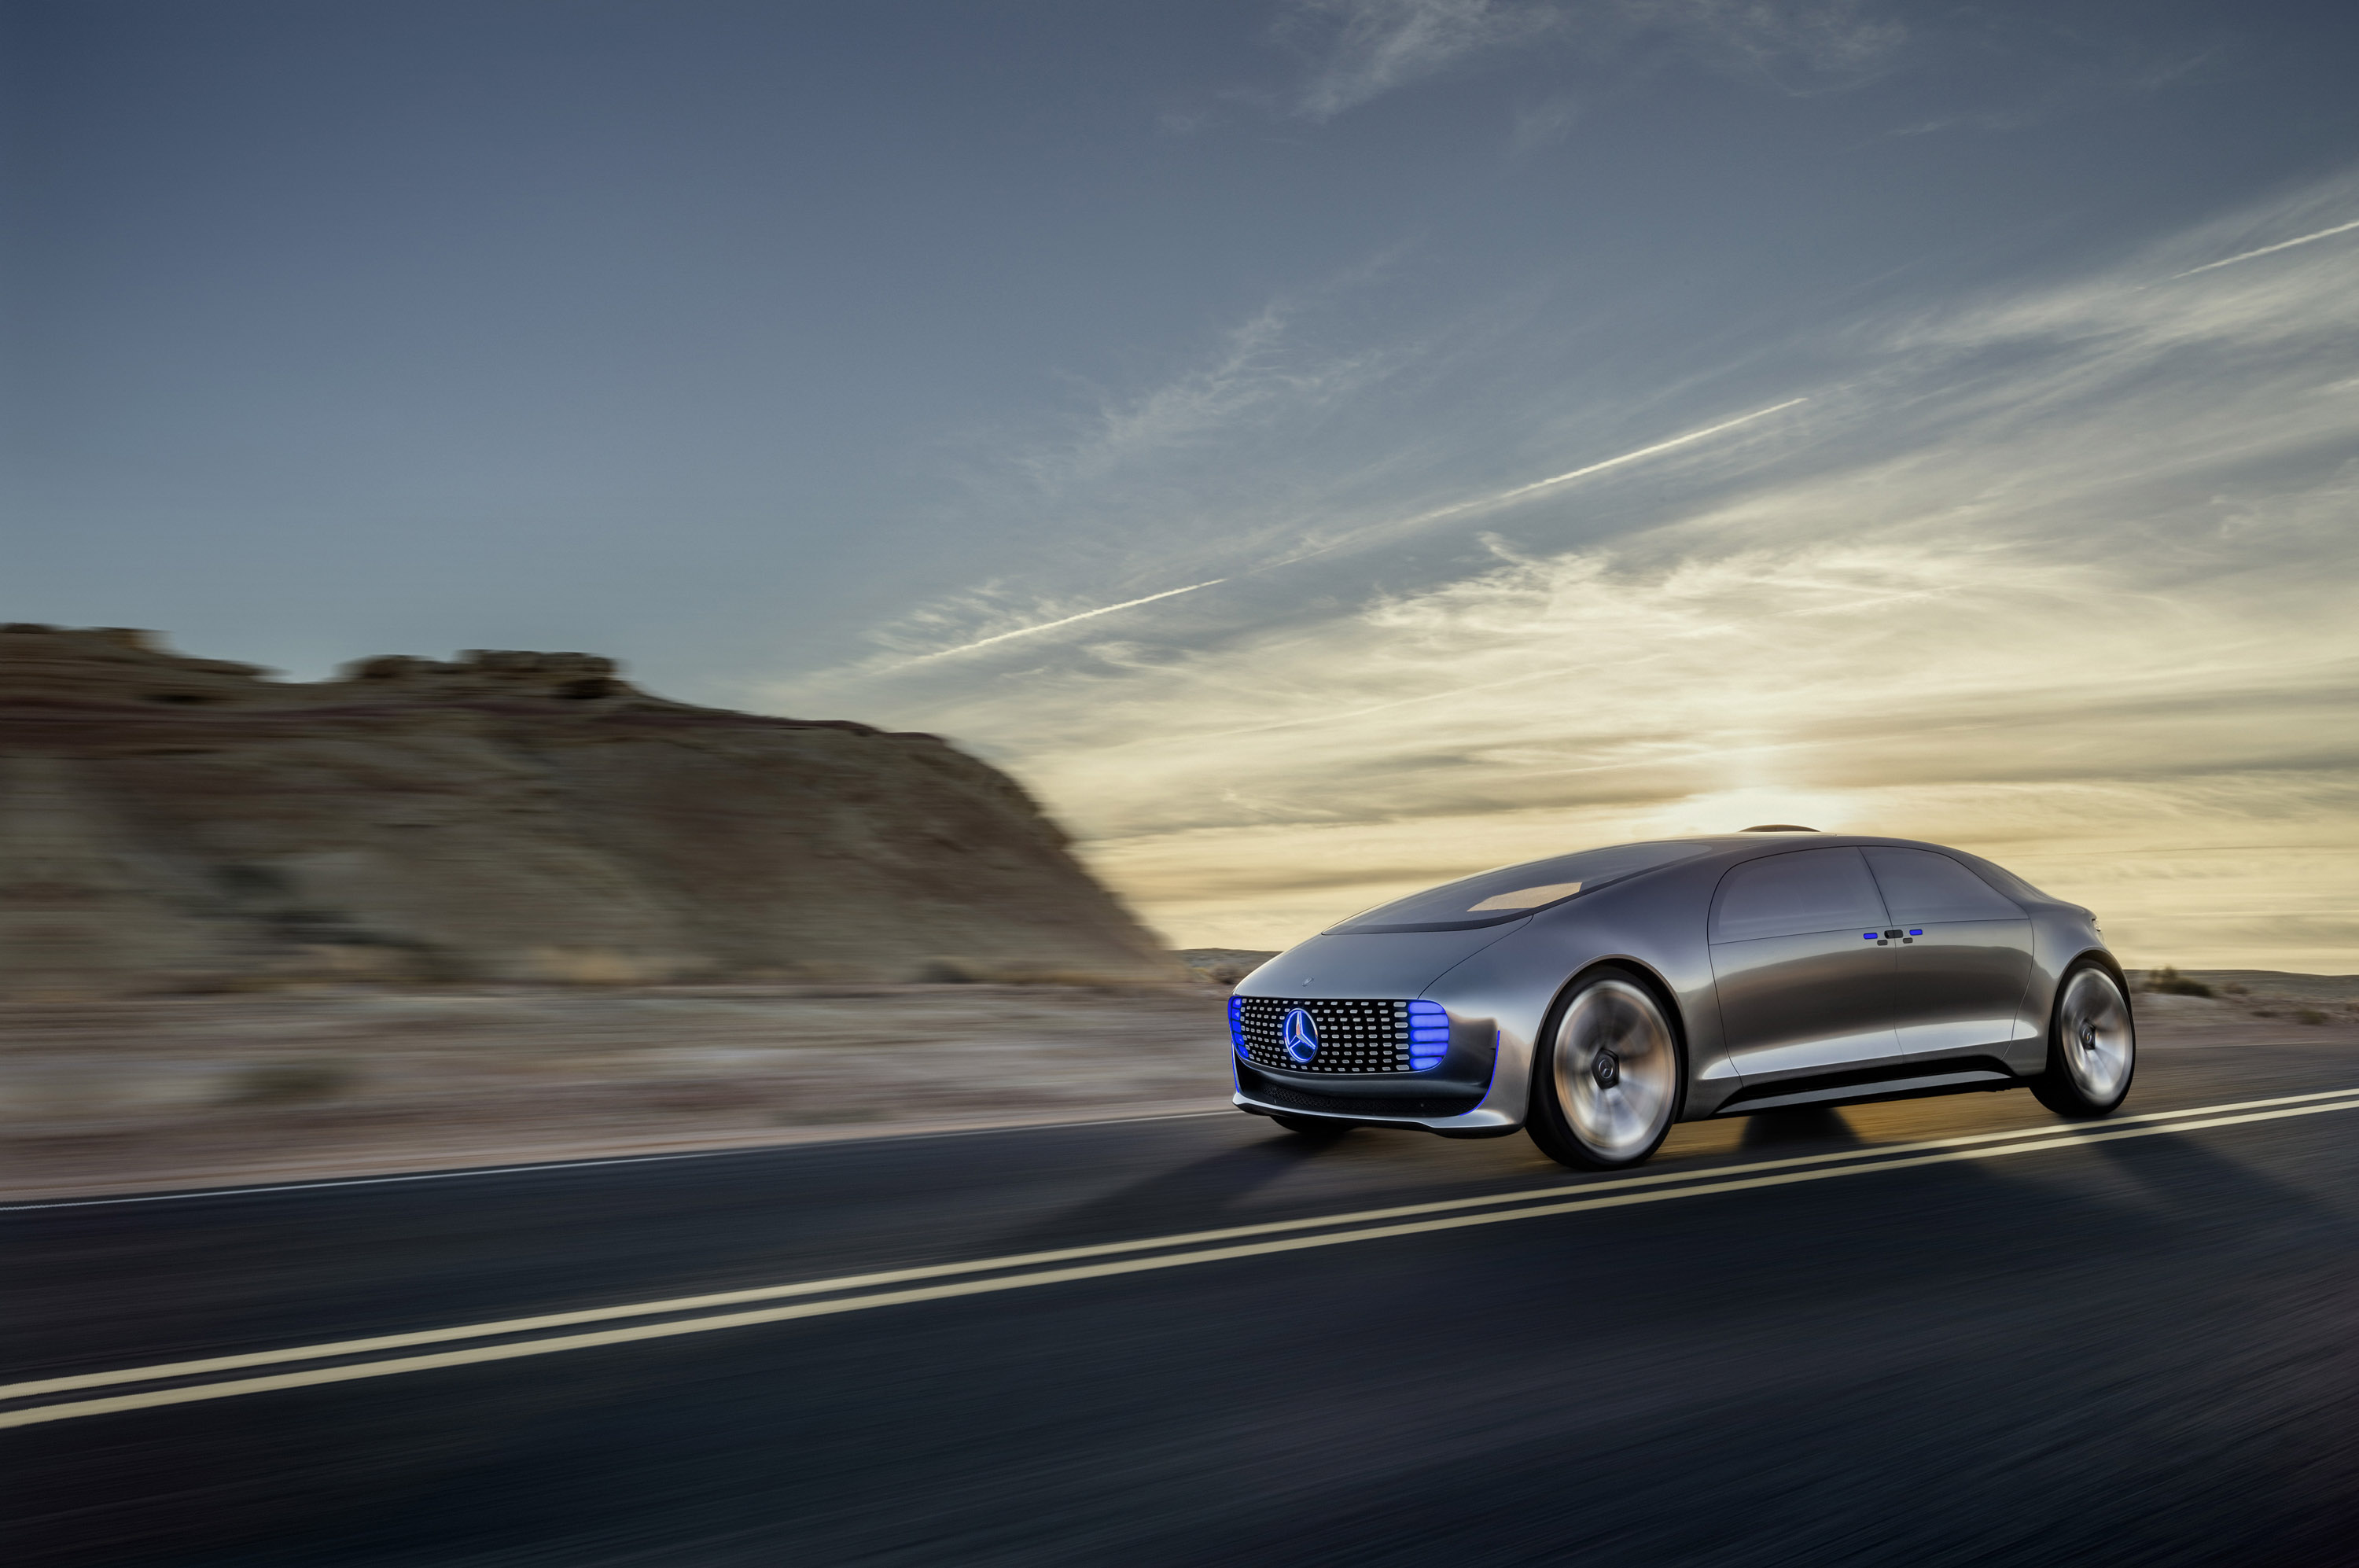 2015 Mercedes-Benz F015 Luxury in Motion Concept thumbnail photo 82950